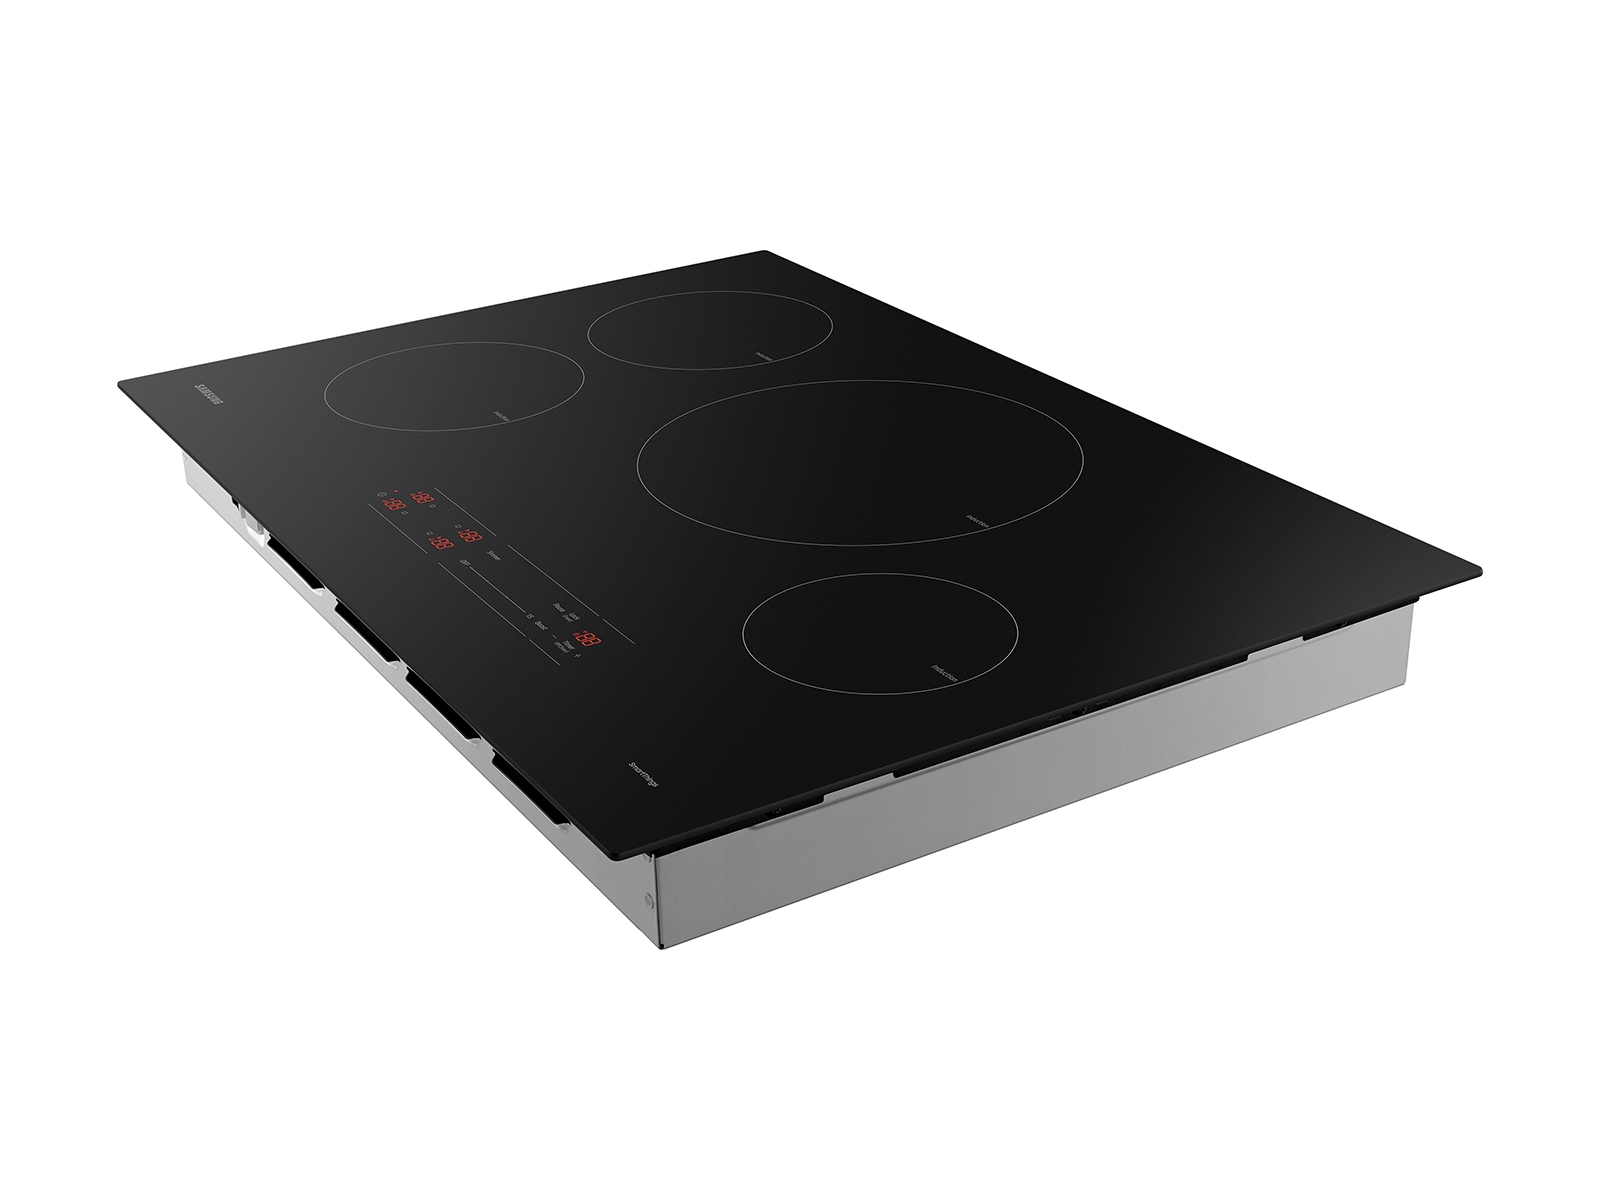 Rent the Induction Cooktop Electric Single Burner